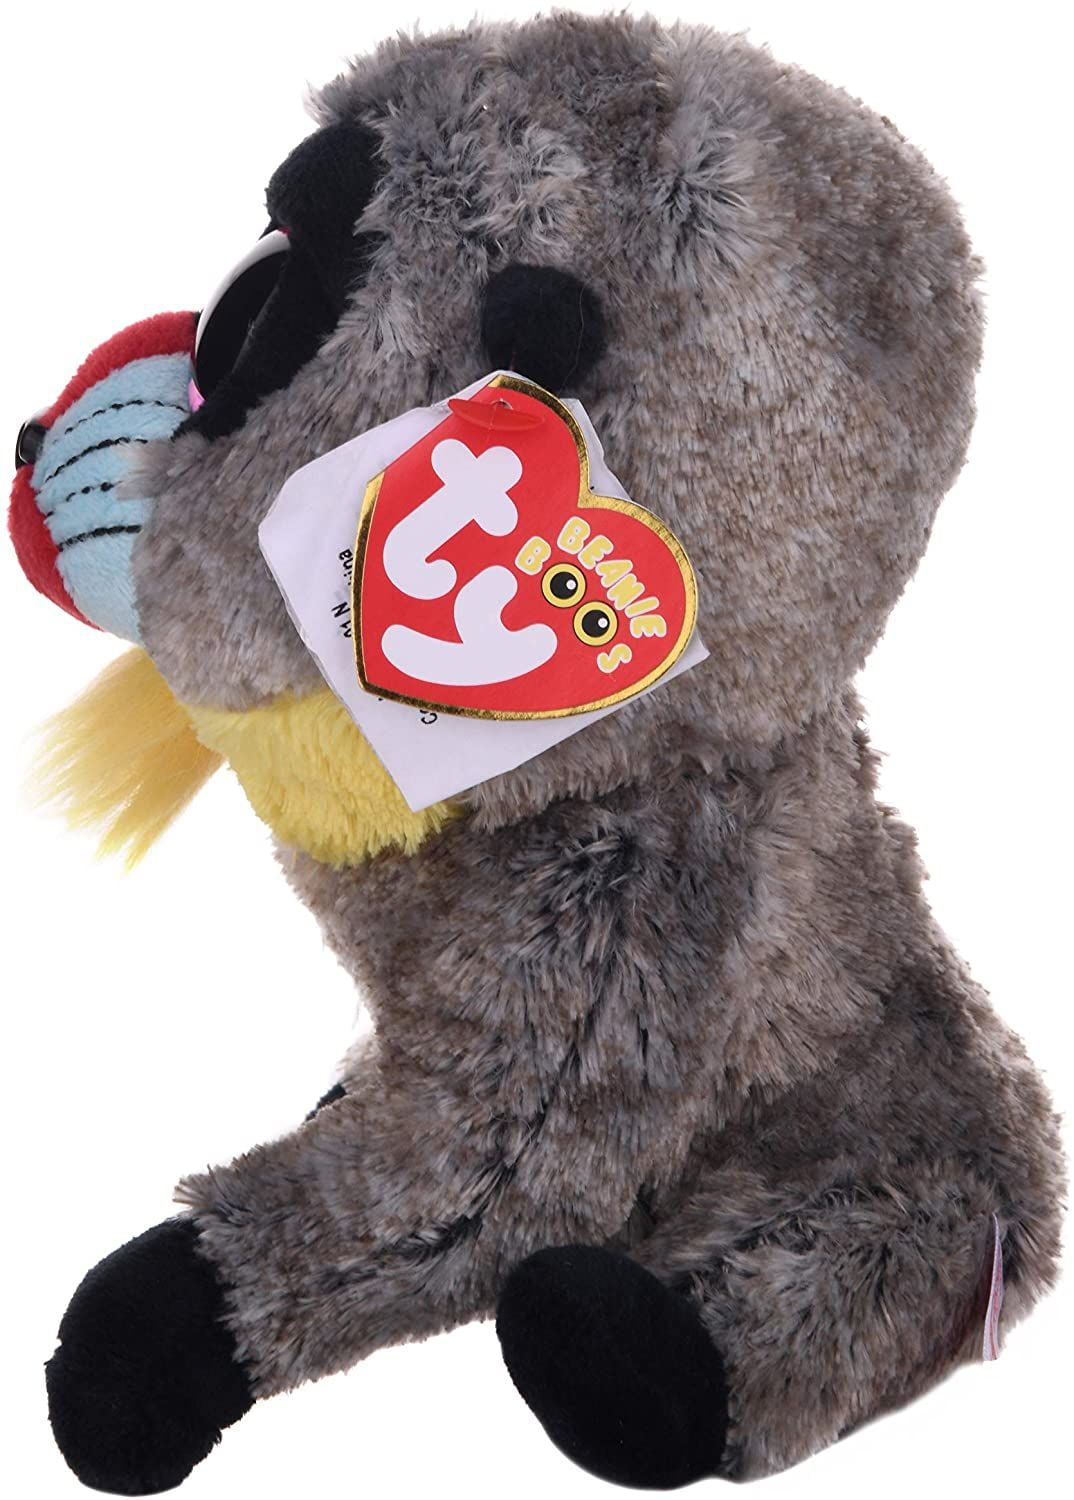 Wasabi Baboon Plush Soft Toy Ty Beanie Boo's Collection 6" 15cm